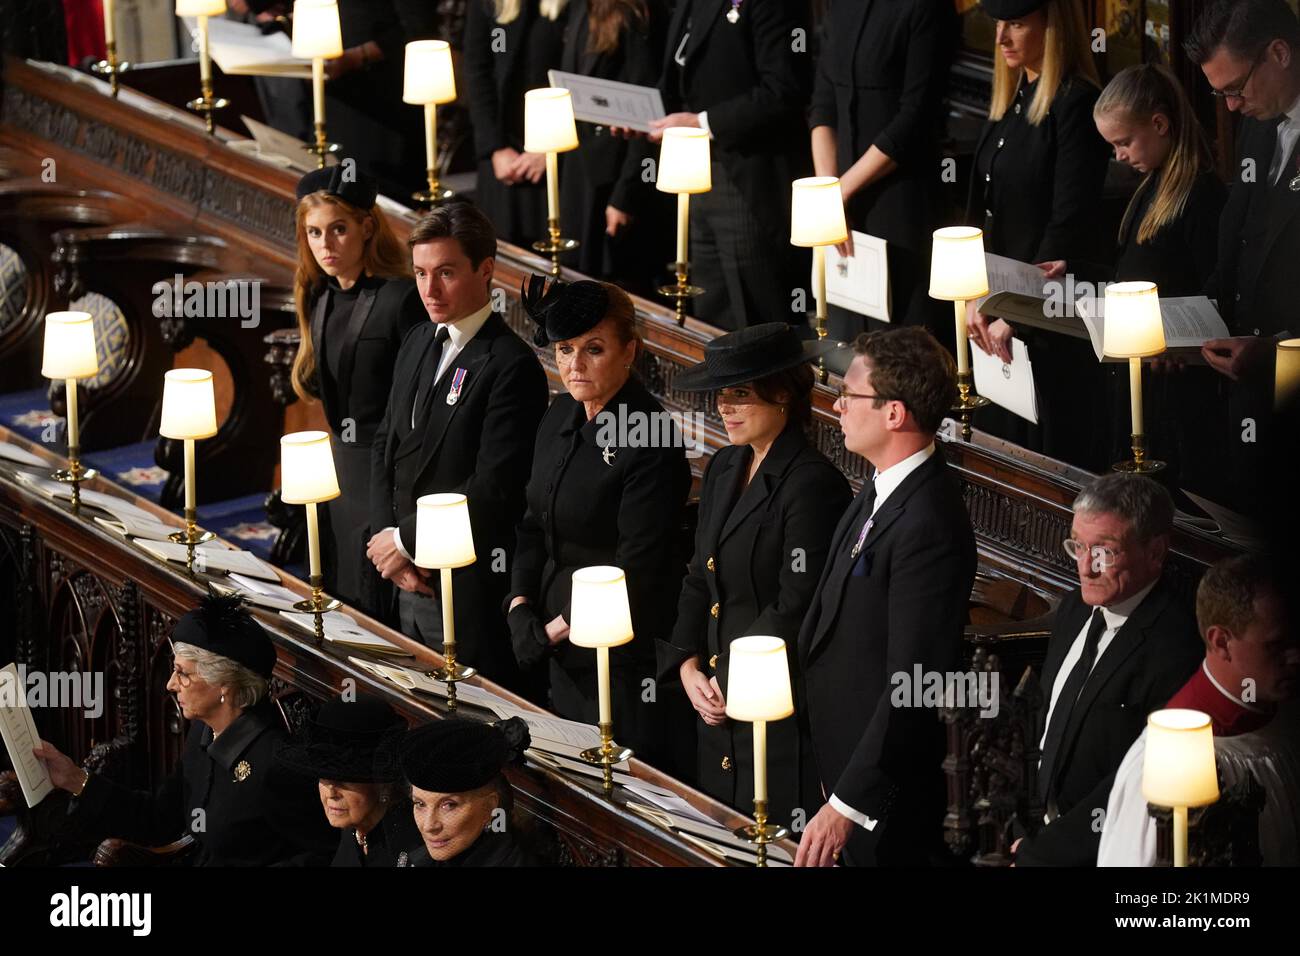 (L-R in second row) Princess Beatrice, Edoardo Mapelli Mozzi, Sarah, Duchess of York, Princess Eugenie and Jack Brooksbank at the Committal Service for Queen Elizabeth II held at St George's Chapel in Windsor Castle, Berkshire. Picture date: Monday September 19, 2022. Stock Photo